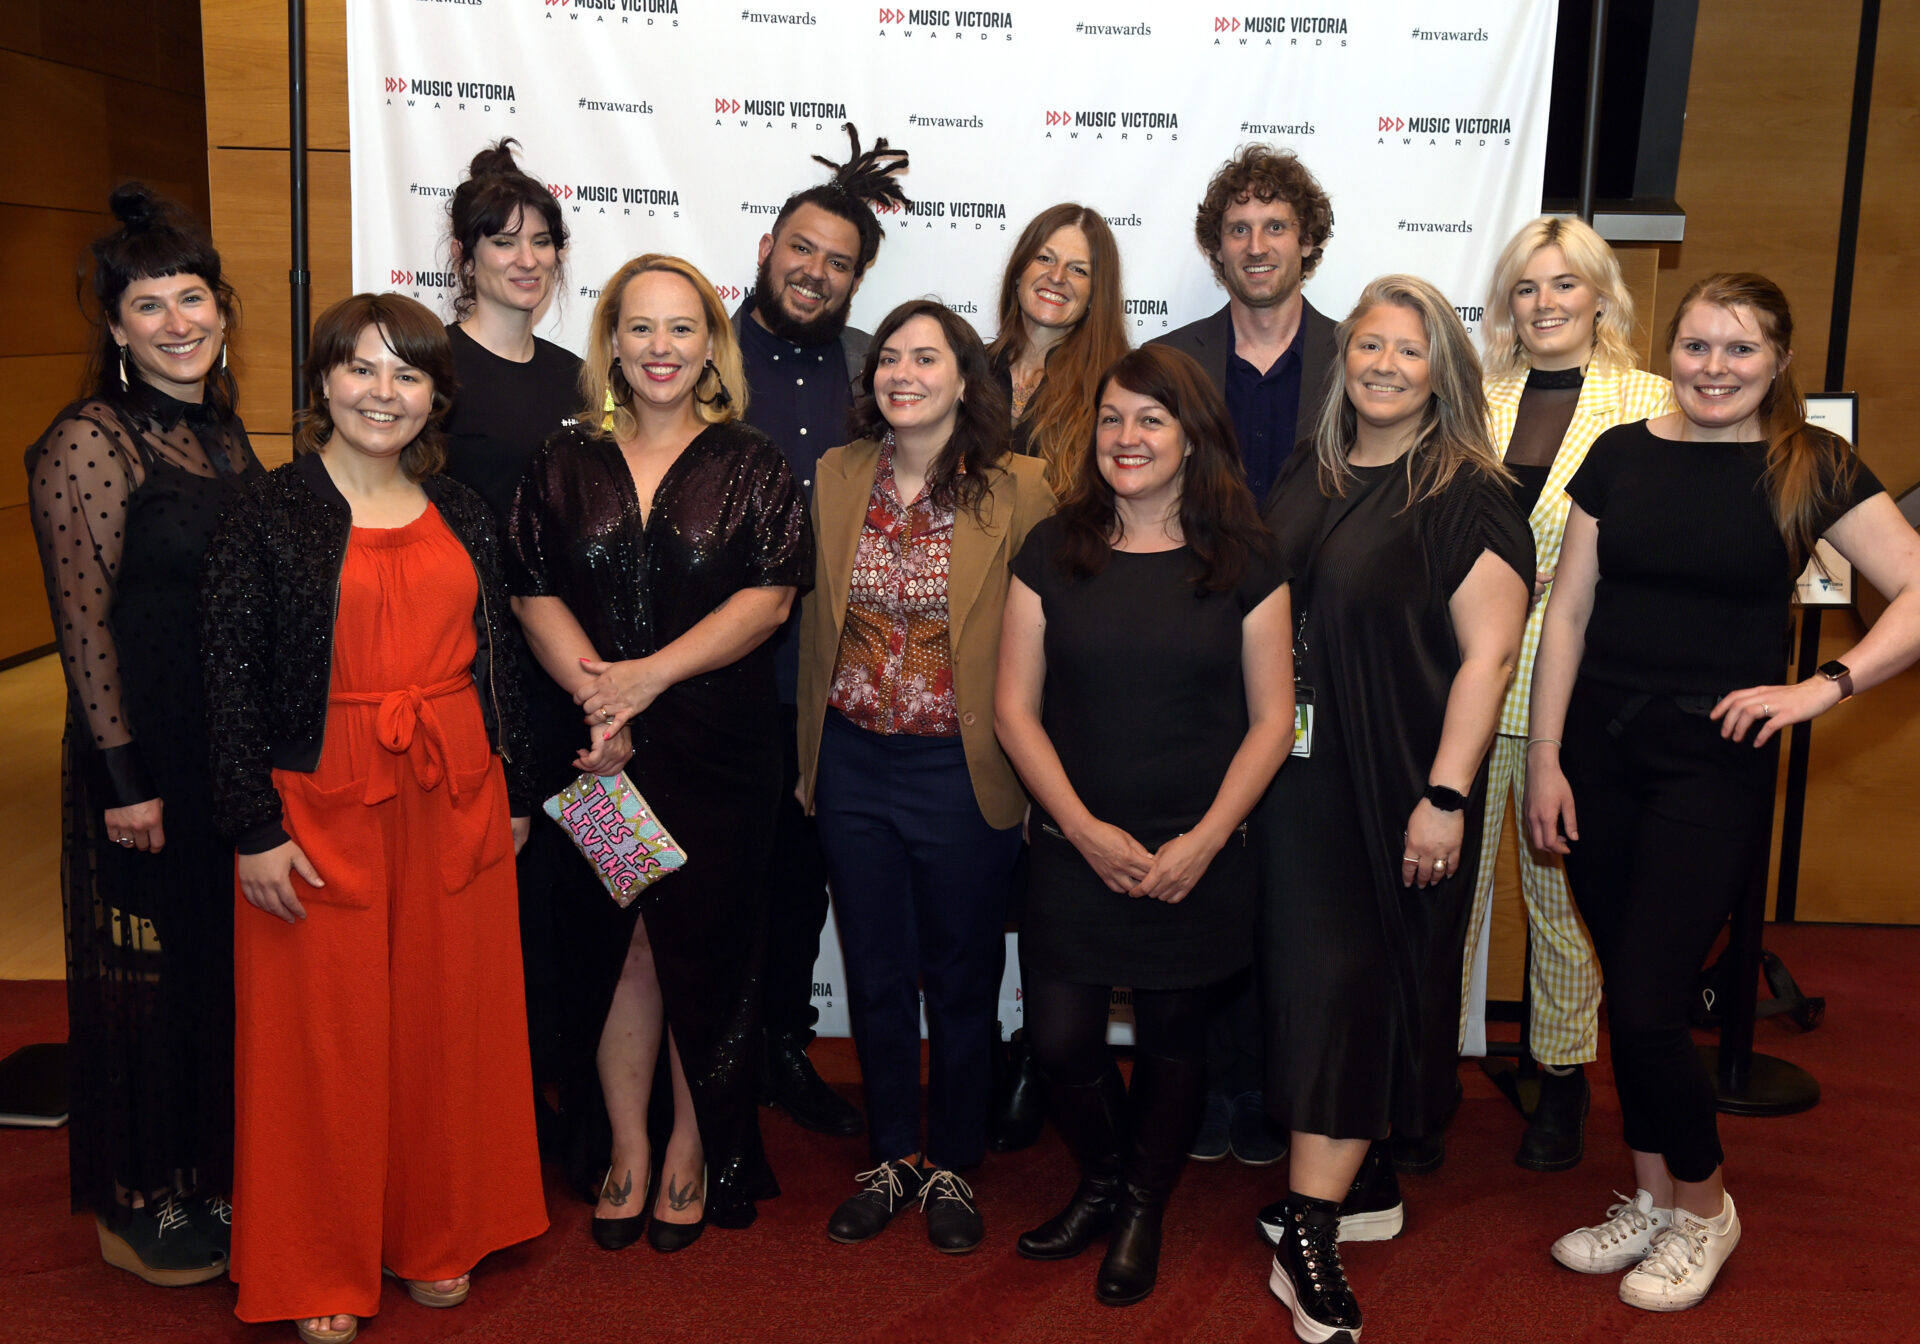 Photo of twelve Music Victoria staff members standing in front of a white banner with a Music Victoria Awards logo. They are dressed for the event and are standing on a red carpet.